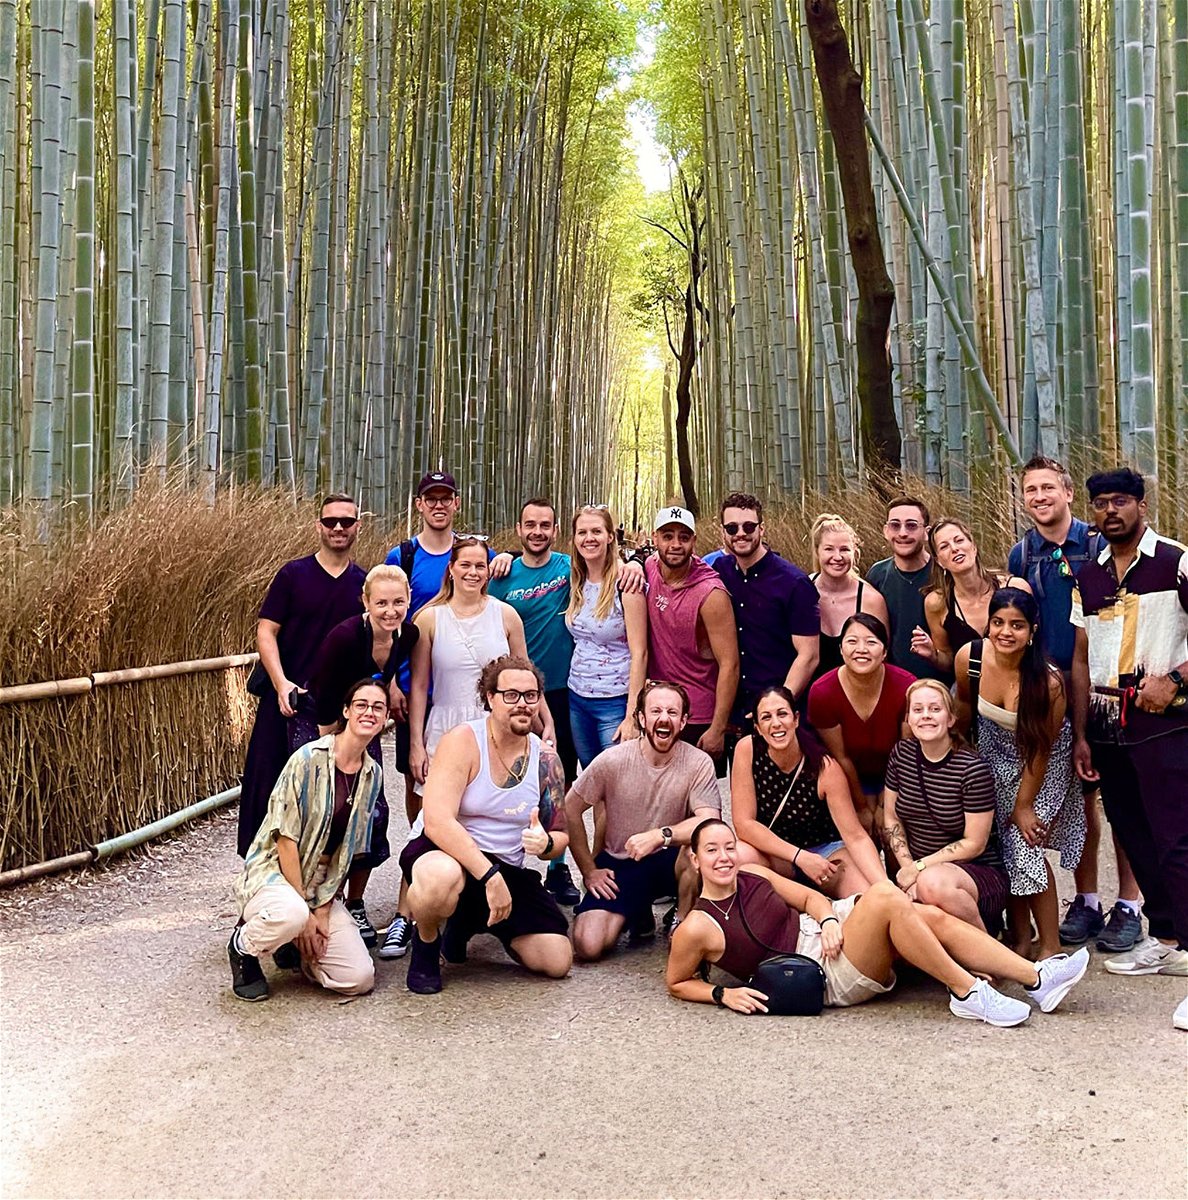 Group of travellers in bamboo forest in Arashiyama Japan